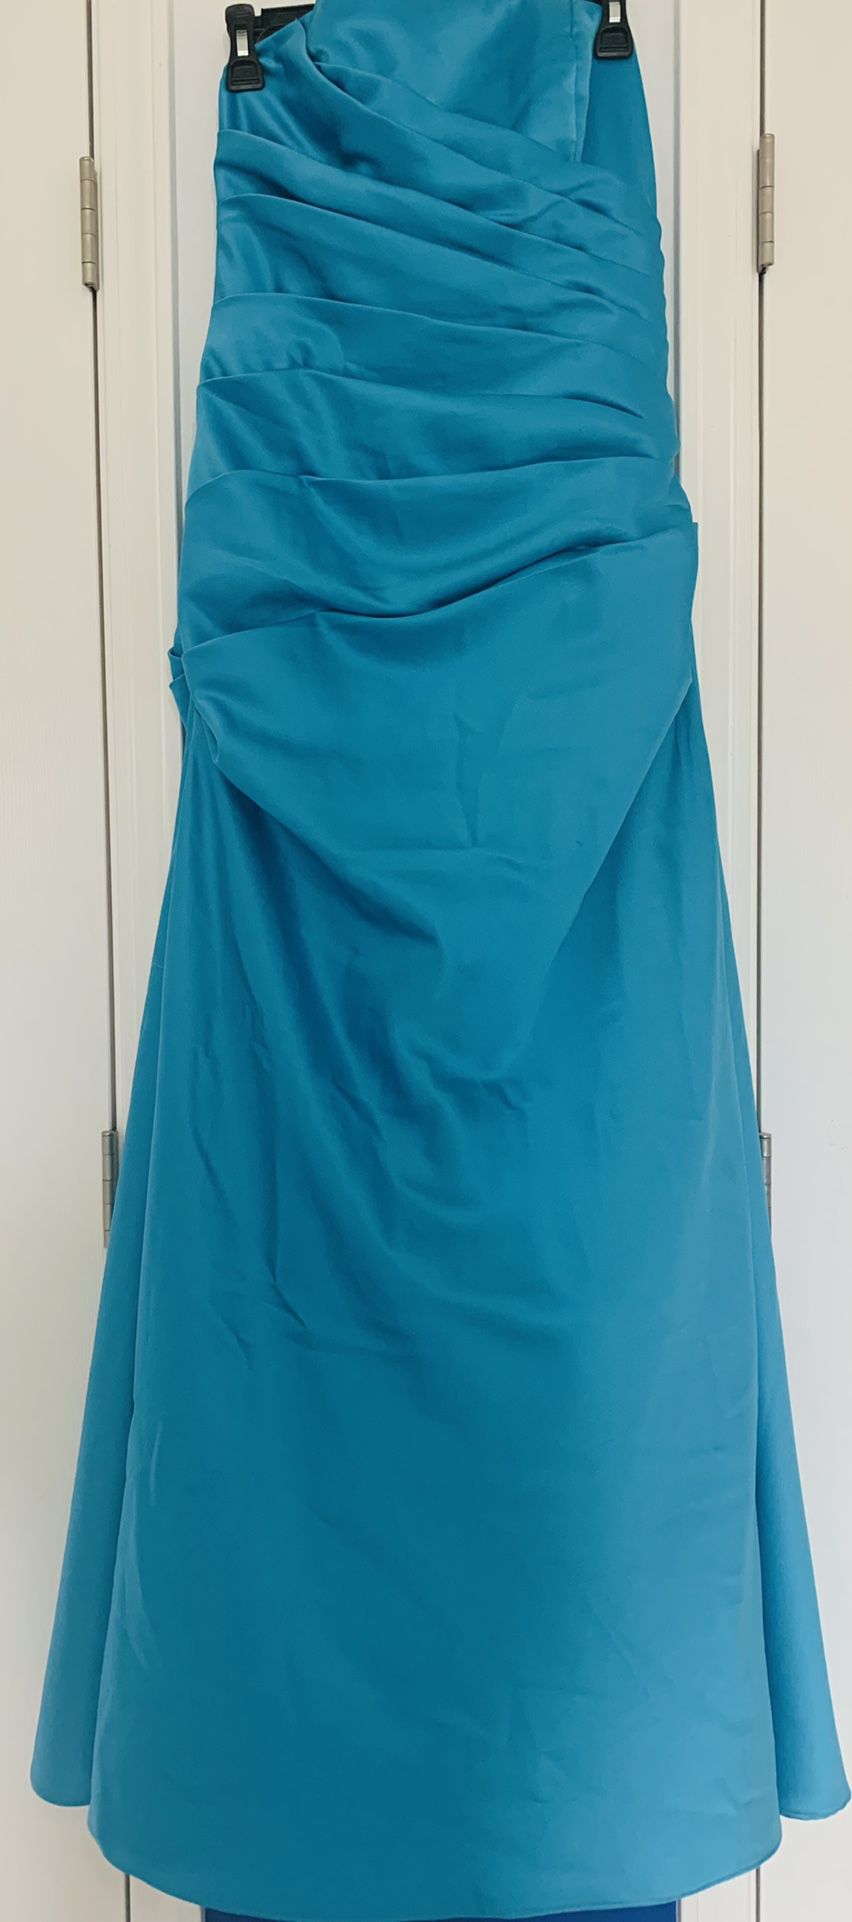 David's Bridal blue wedding dresses, strapless , satin, Size 10 , Style F13974. Worn once Beautiful for prom or formal wear .